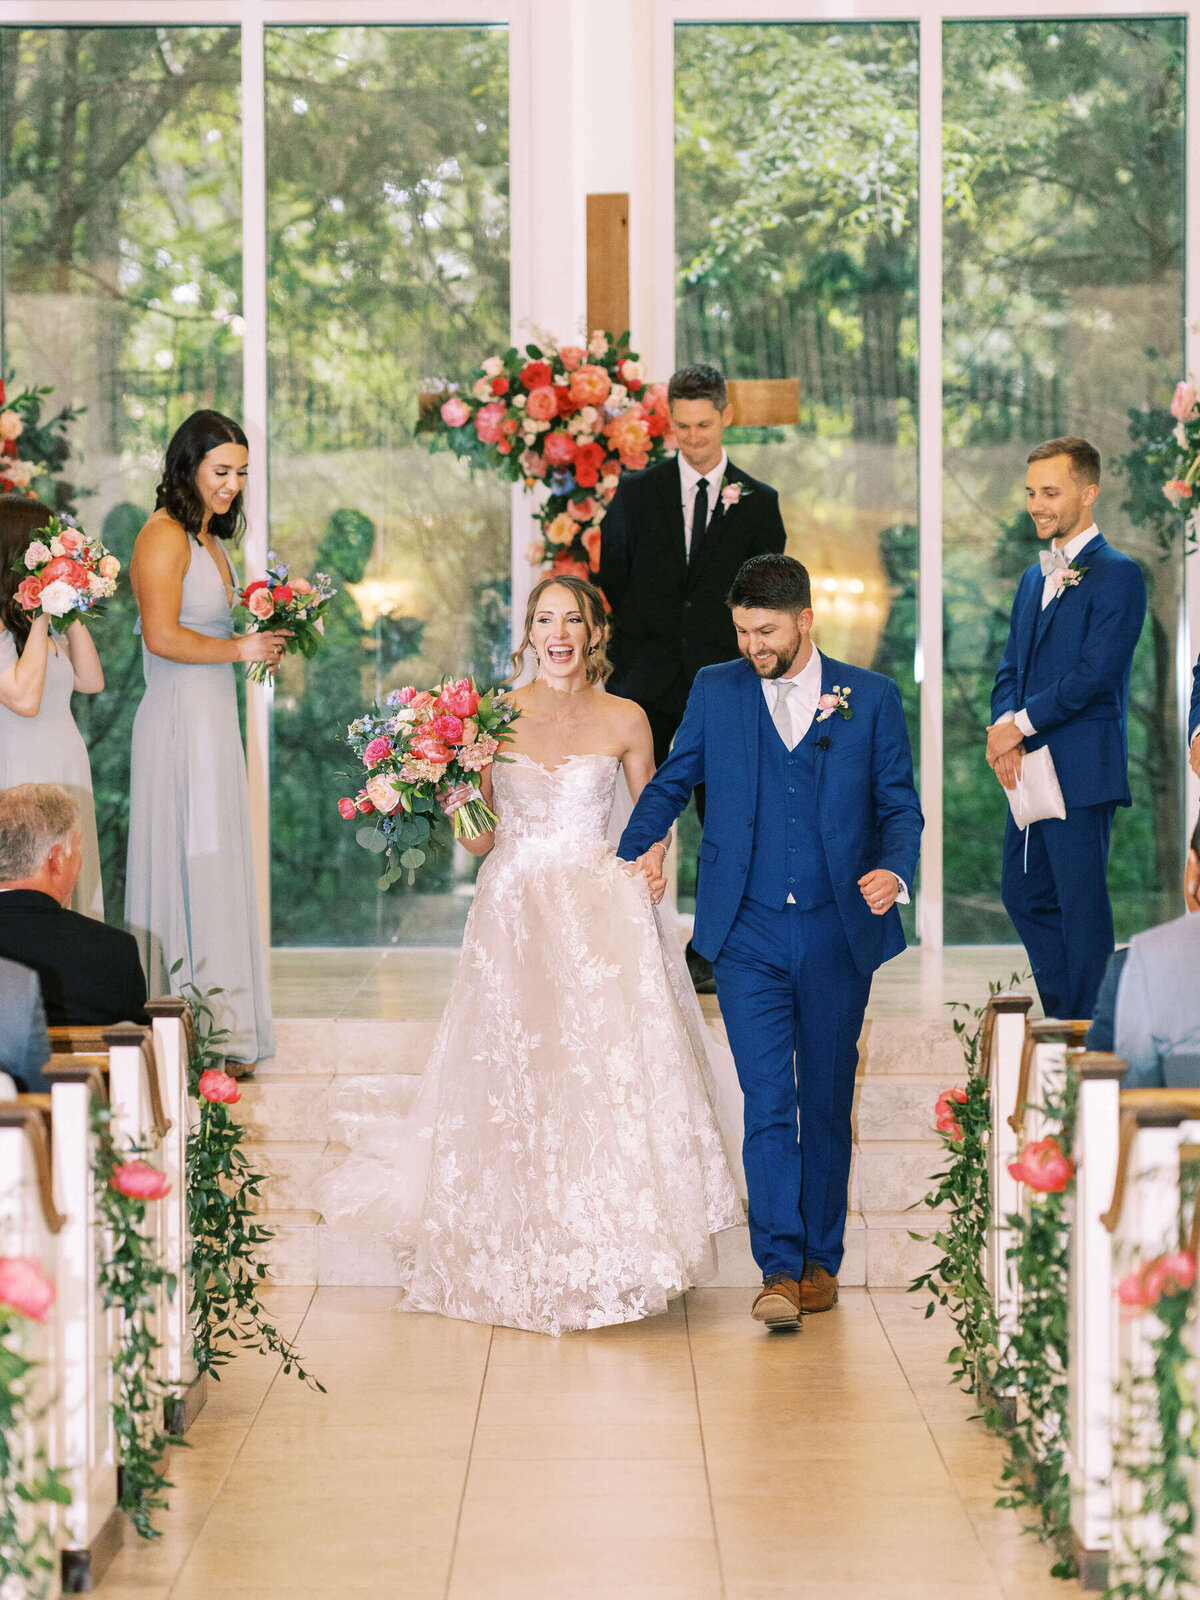 Newly married bride and groom walk down the aisle at Ashton Gardens wedding venue in Dallas Texas